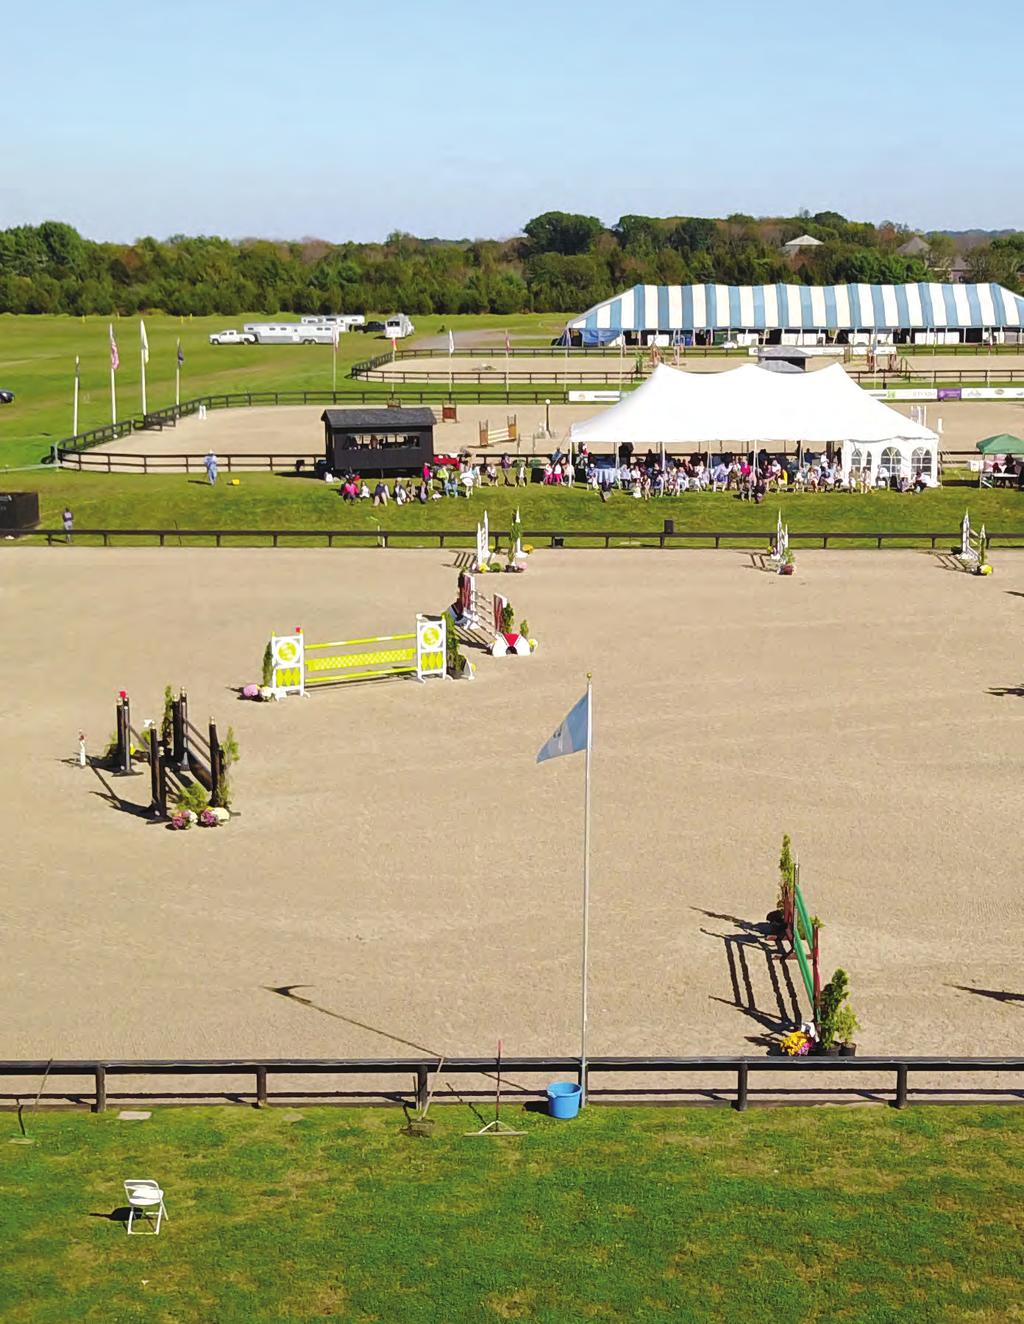 Princeton Show Jumping 2018 USEF Rated Dates April 18-22 Princeton Spring Classic I AA Hunters and Equitation/Jumper 4 April 25-29 Princeton Spring Classic II AA Hunters and Equitation/Jumper 4 May